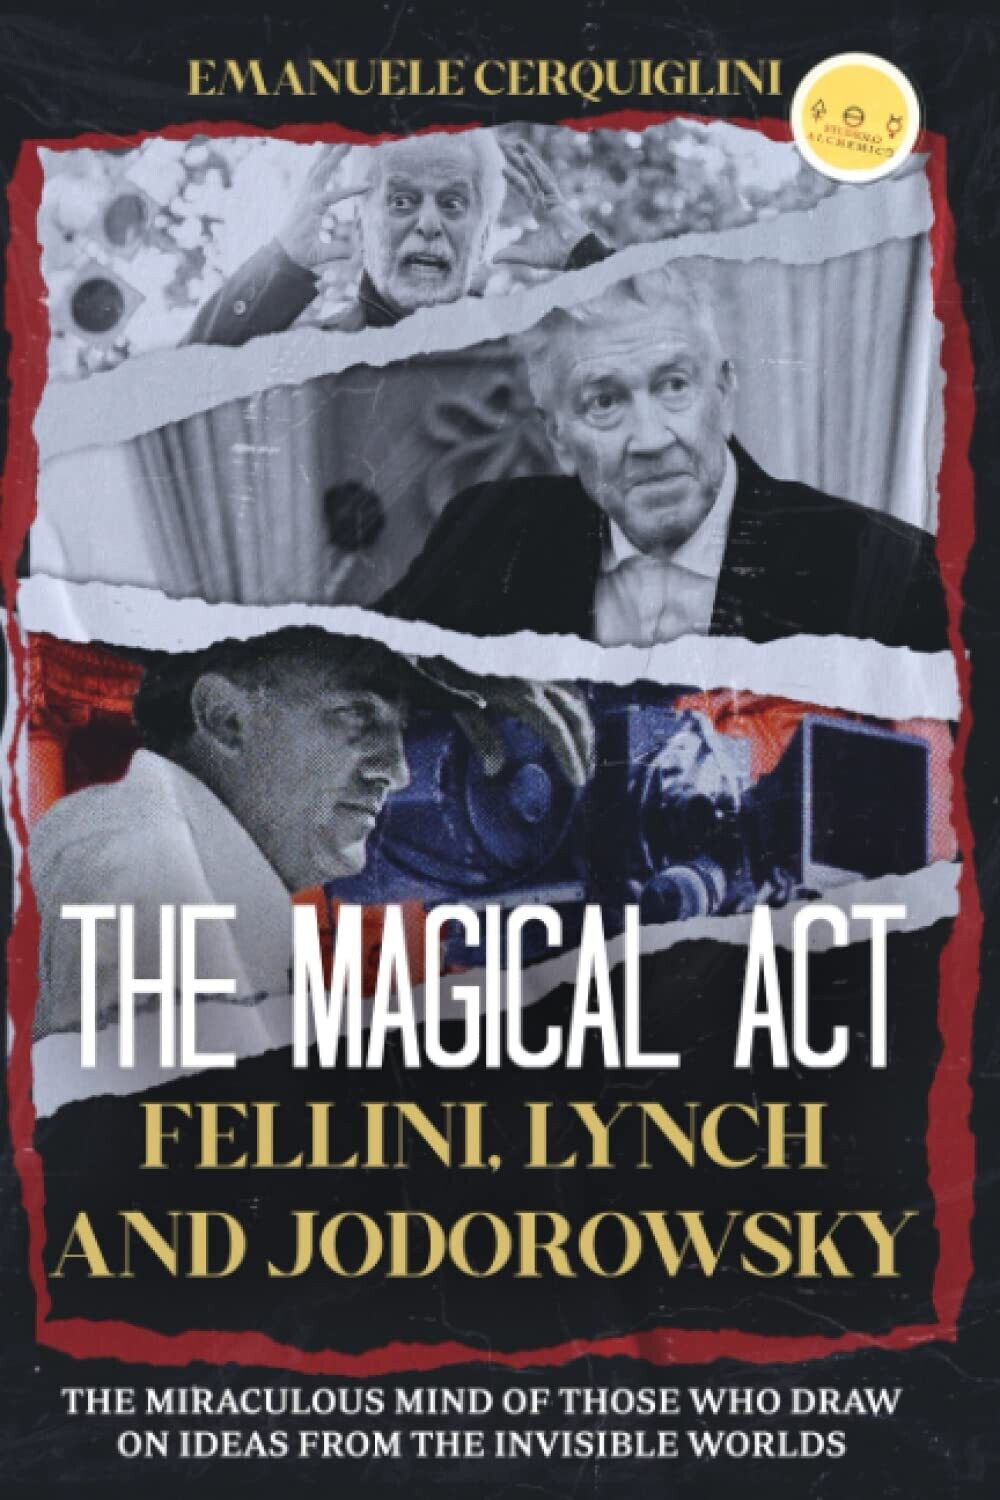 THE MAGICAL ACT: Fellini, Lynch and Jodorowsky The miraculous mind of those who draw on ideas from the invisible worlds (Hardcover, NEW)